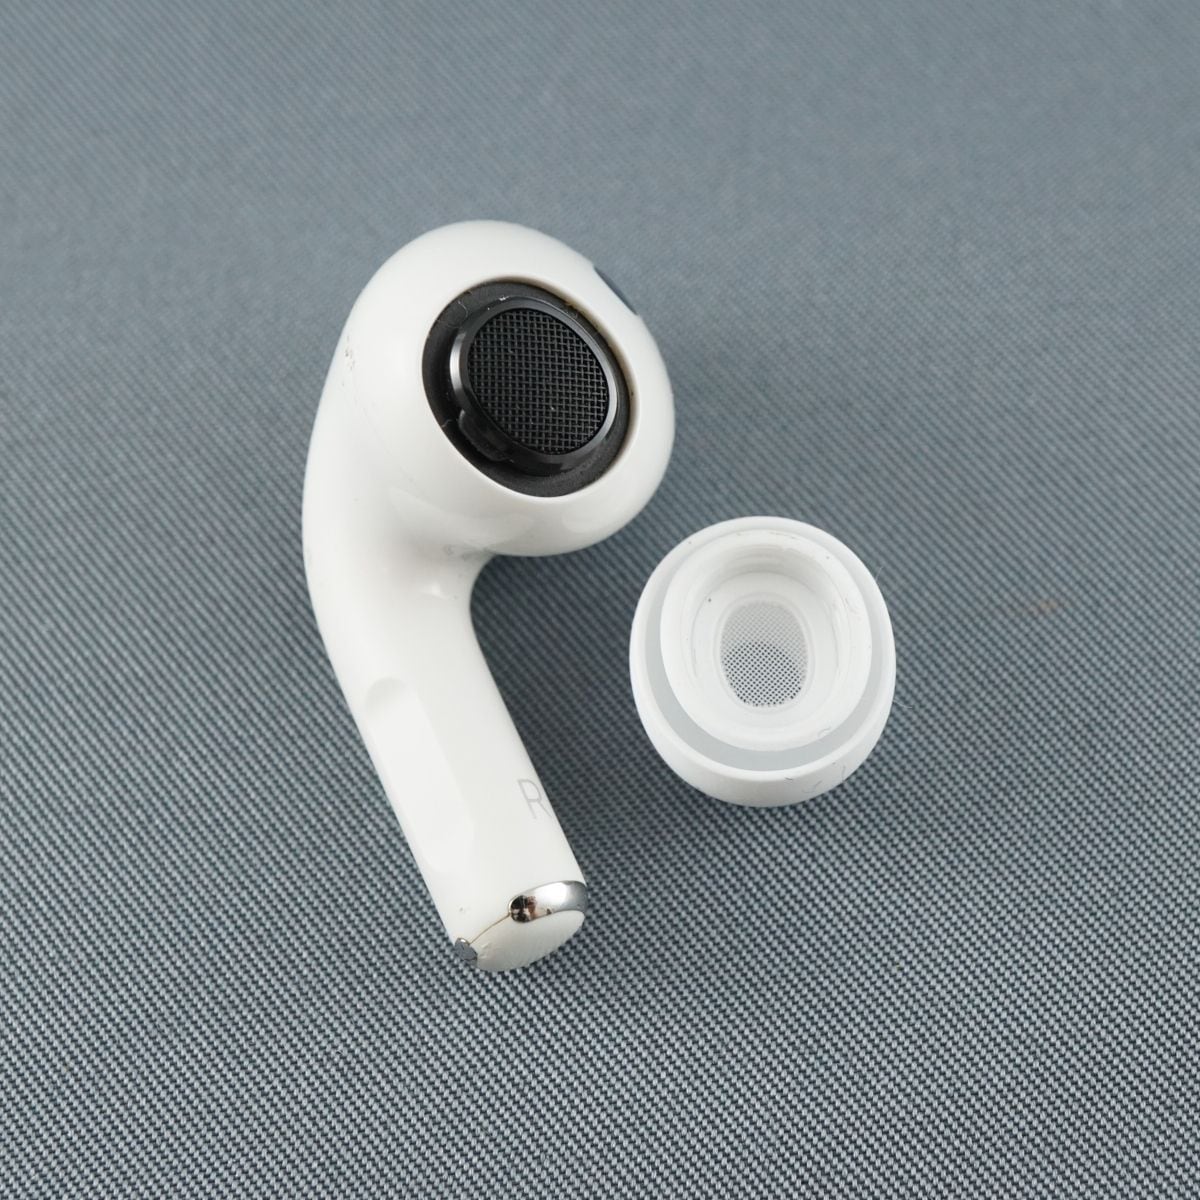 MWP22J/A】AirPods Pro イヤホン 右耳 のみ R片耳 - イヤフォン